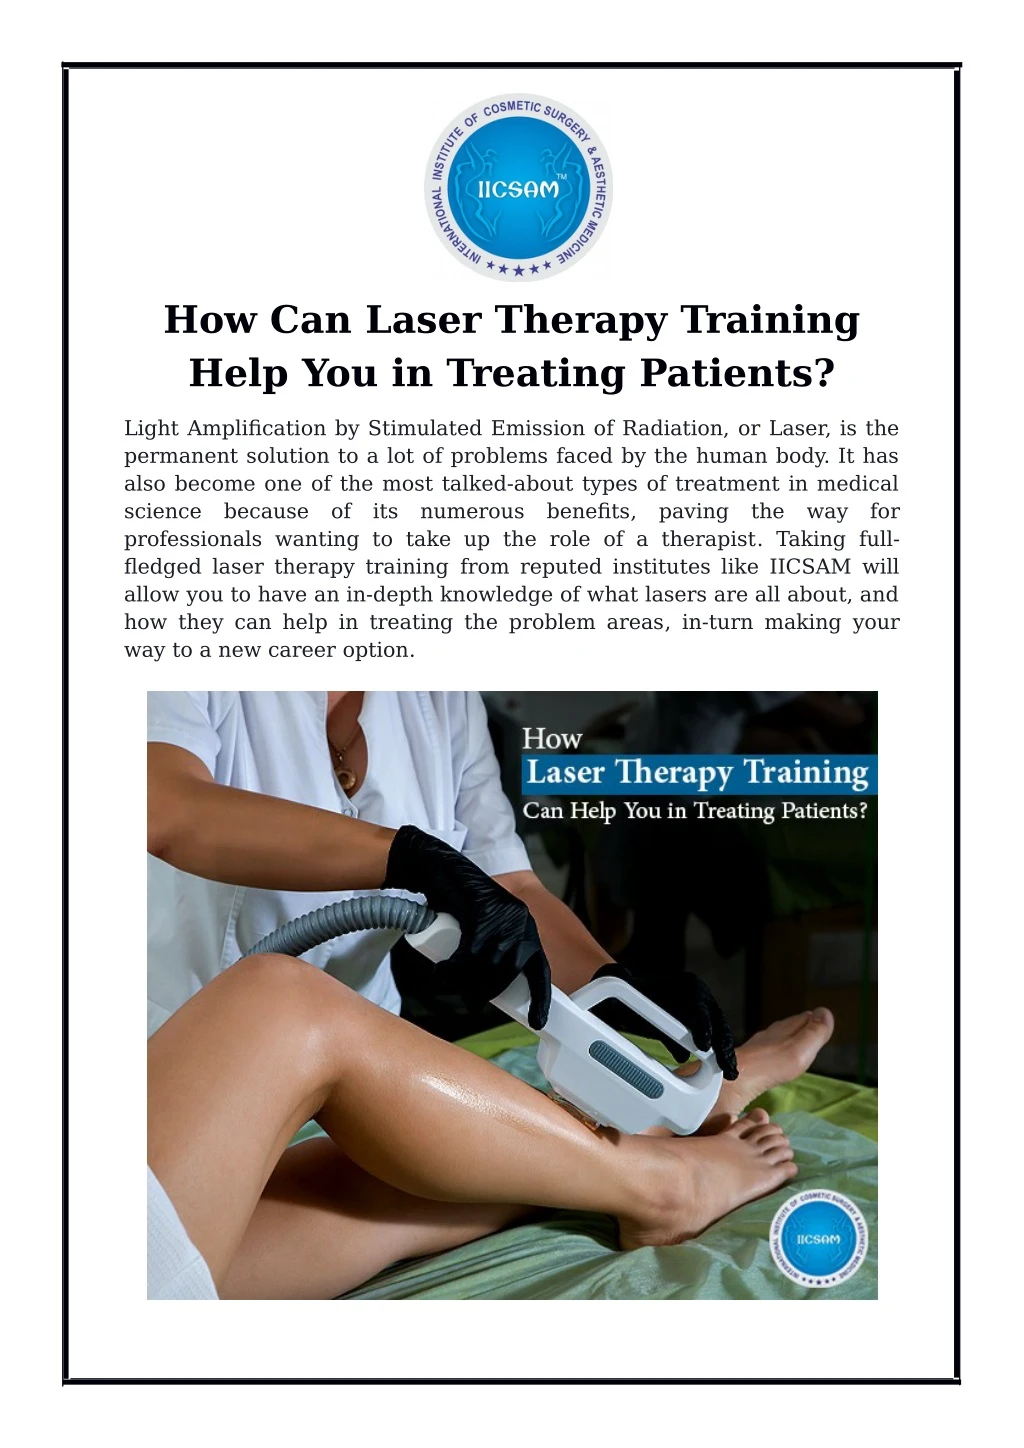 how can laser therapy training help